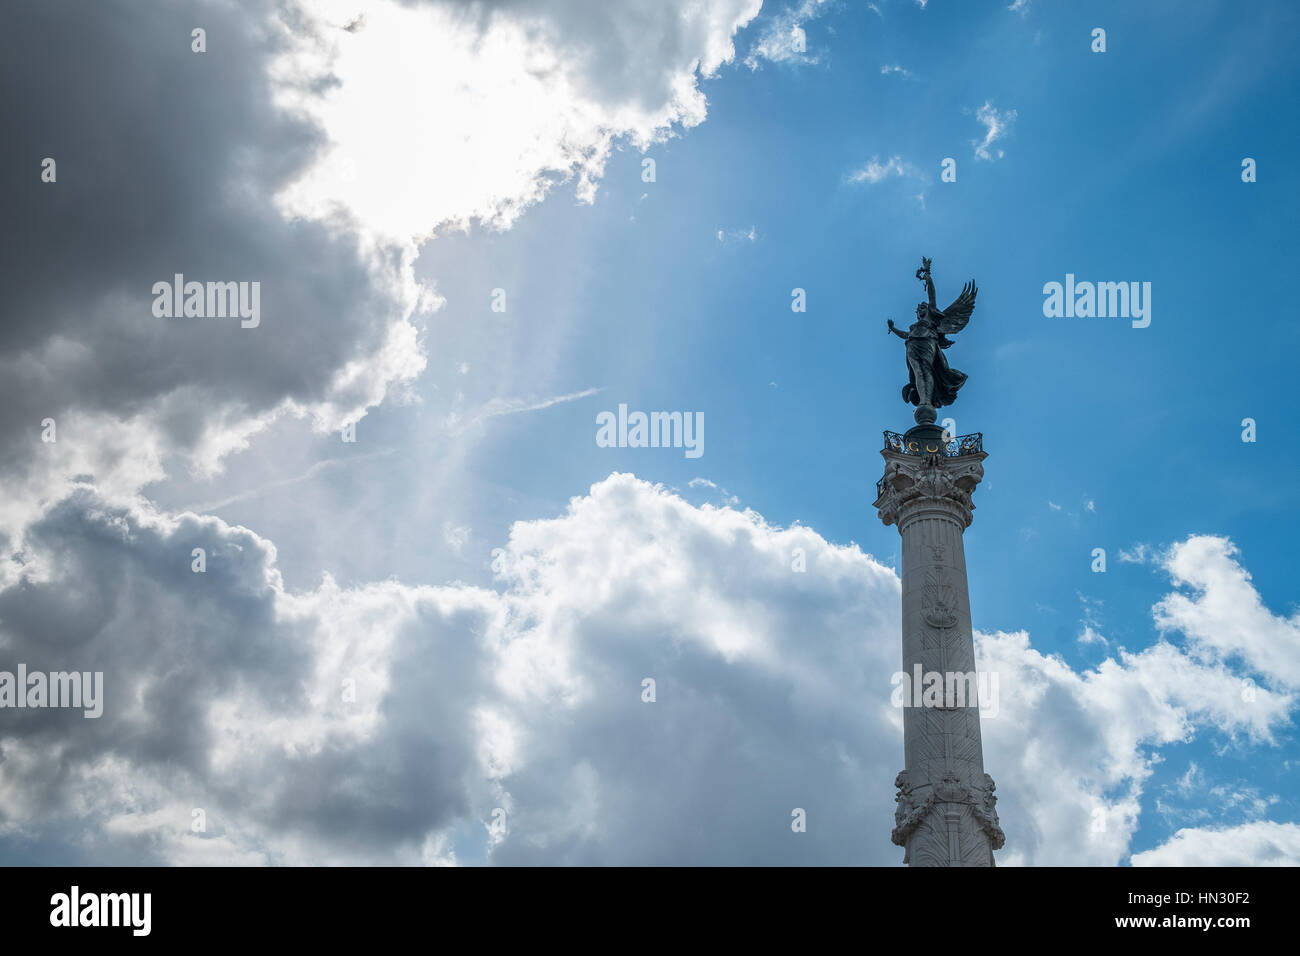 monument, france, bordeaux, fountain, statue, girondins, place, sculpture, aquitaine, symbol, art, gironde, quinconces, history, french, architecture, Stock Photo